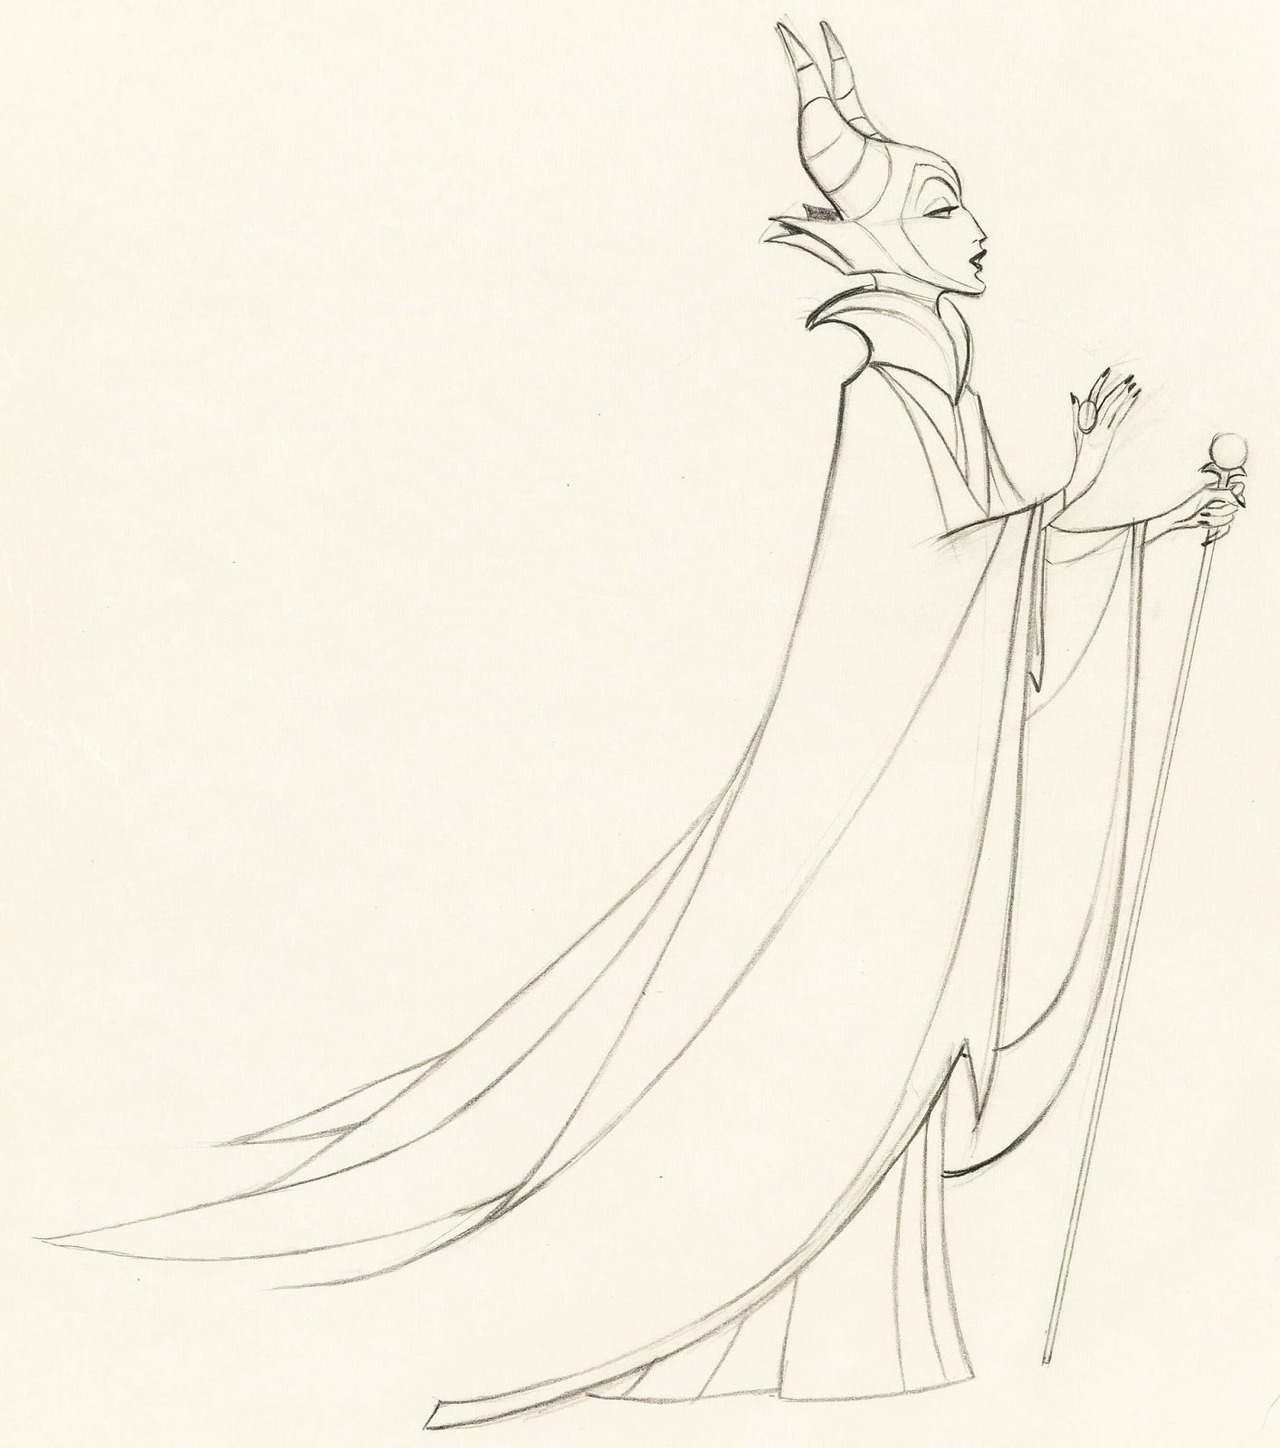 Buy Maleficent Pencil Portrait Drawing Print Online in India - Etsy